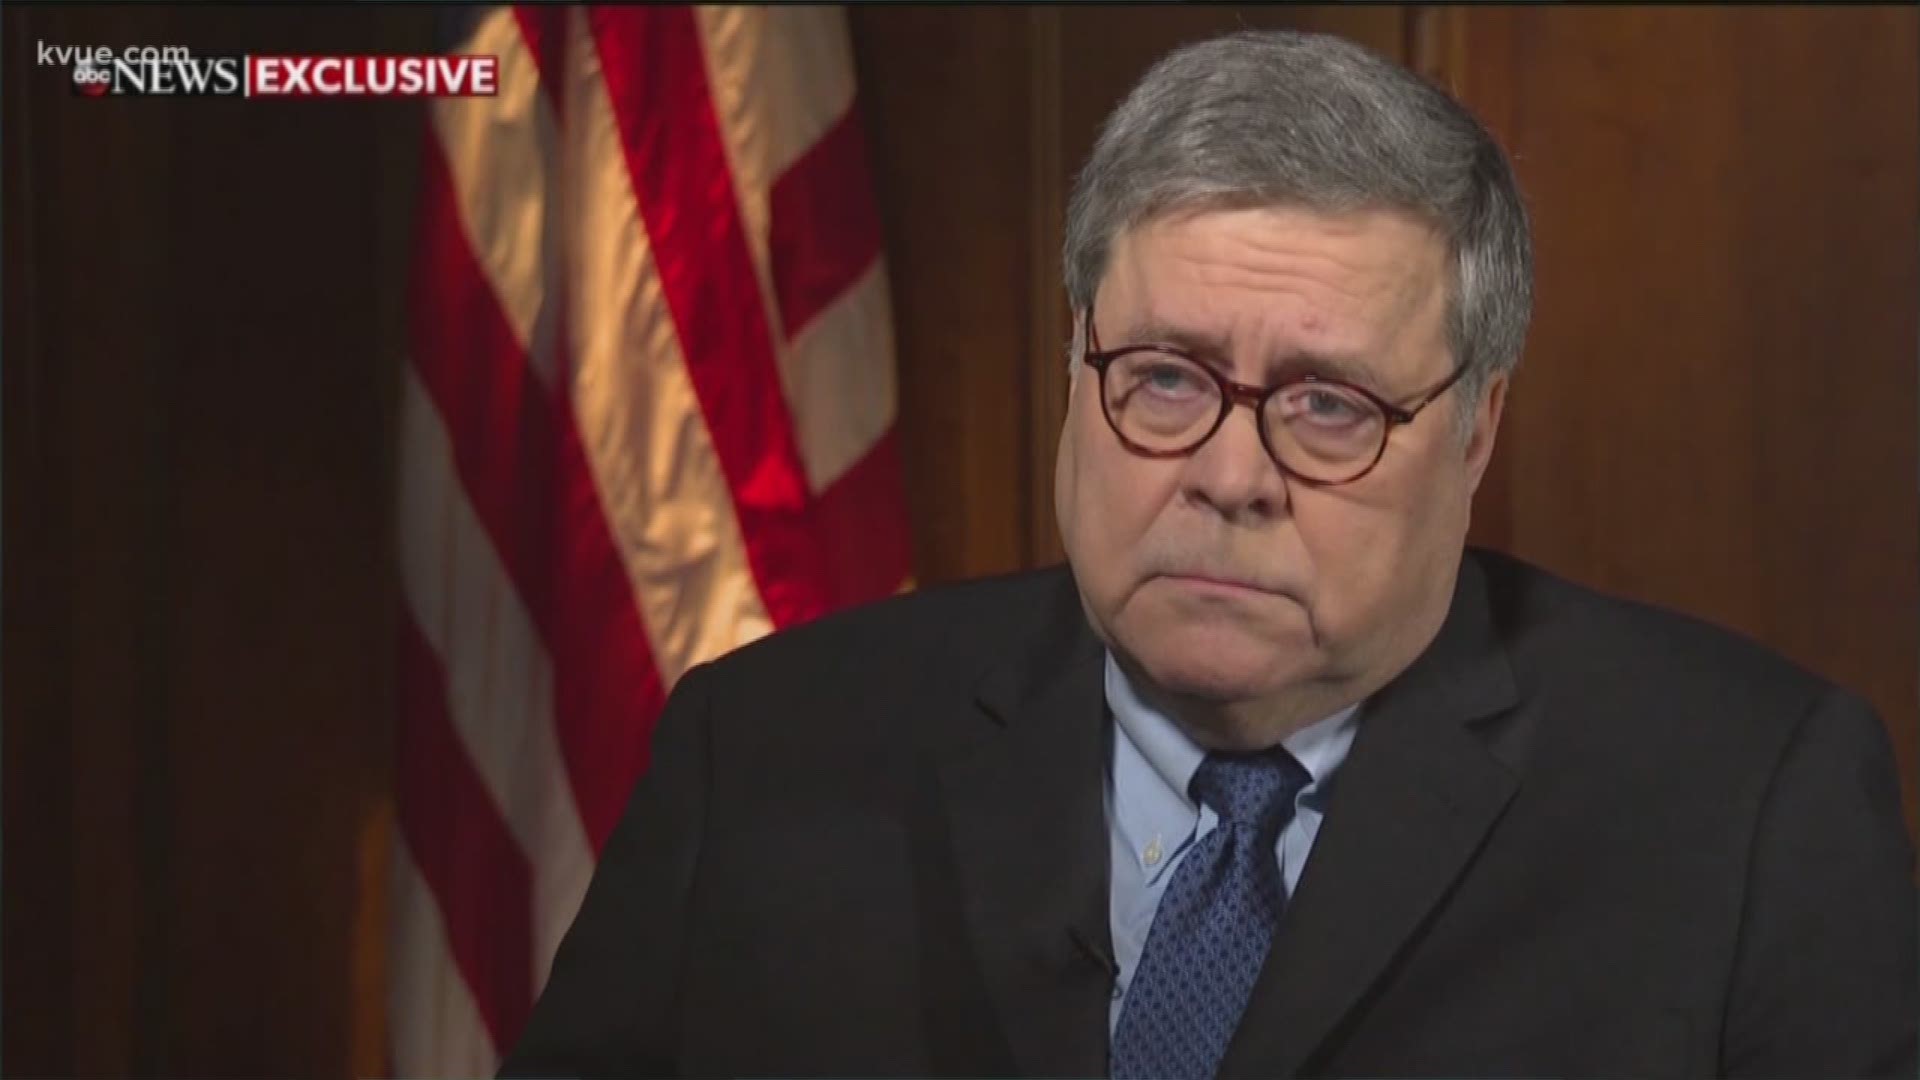 More than 2,000 former Department of Justice officials signed a letter calling for U.S. Attorney General William Barr to resign – including one Austin attorney.